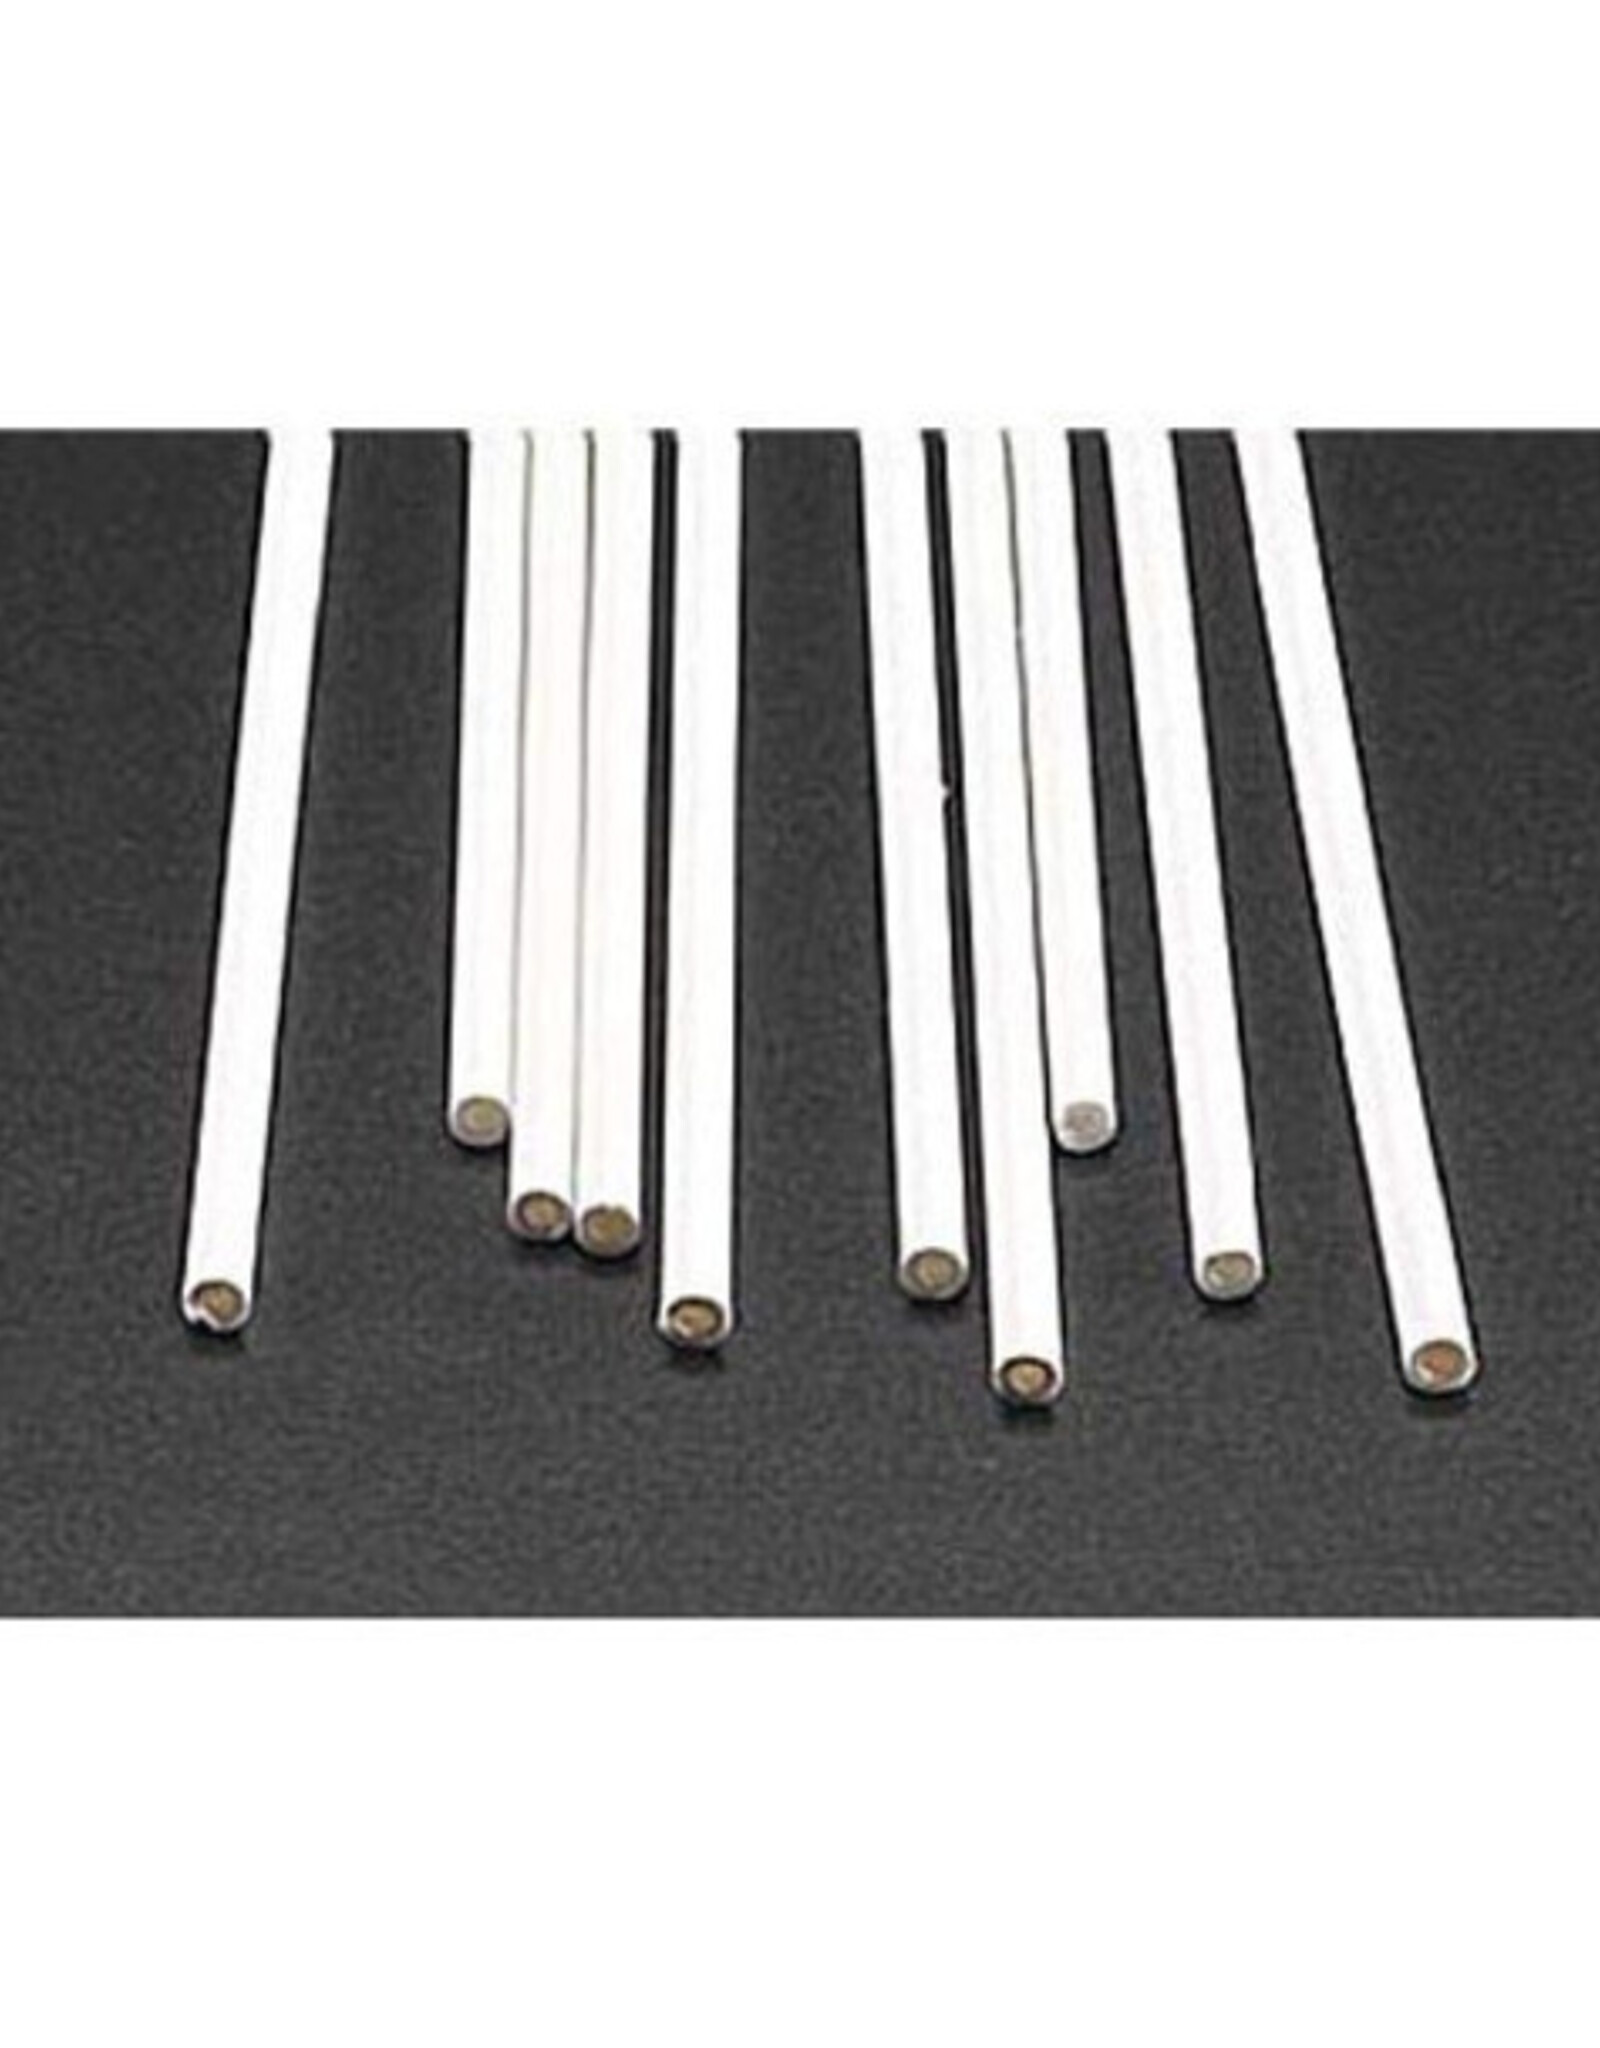 Butyrate Tubing (1/8", 10 pieces)